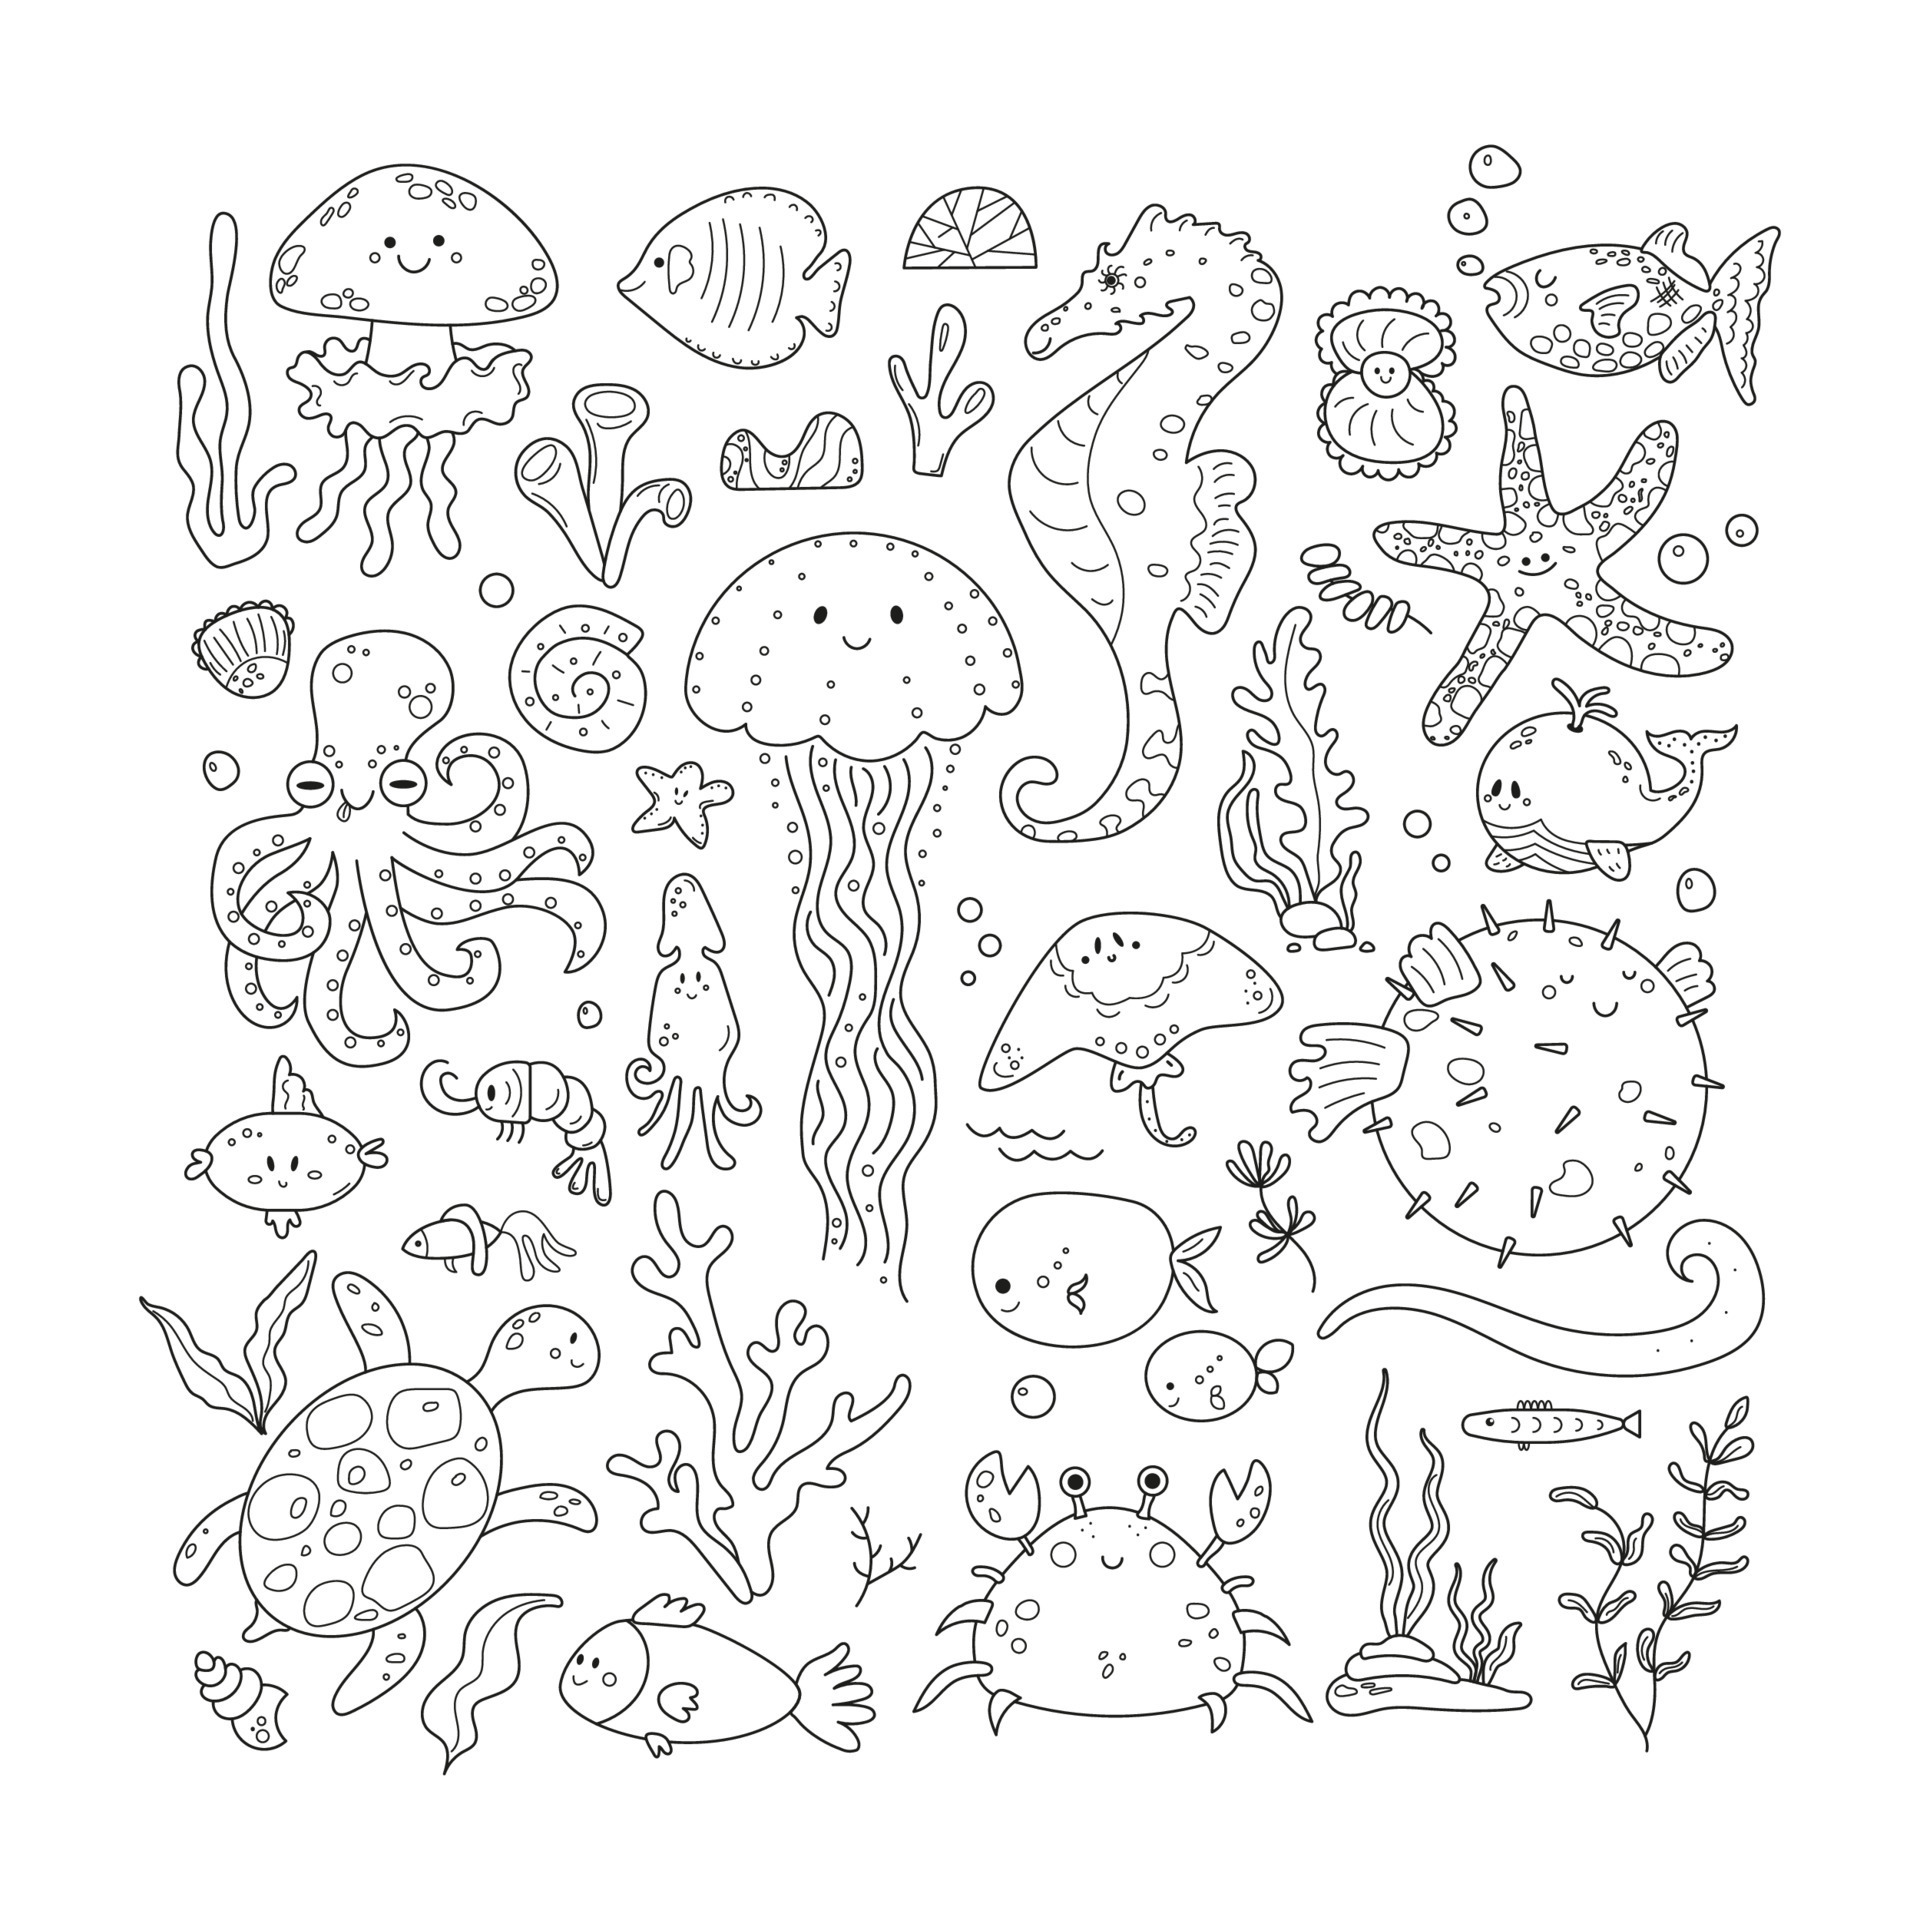 Cute sea creatures and underwater animals doodle set. Water turtle